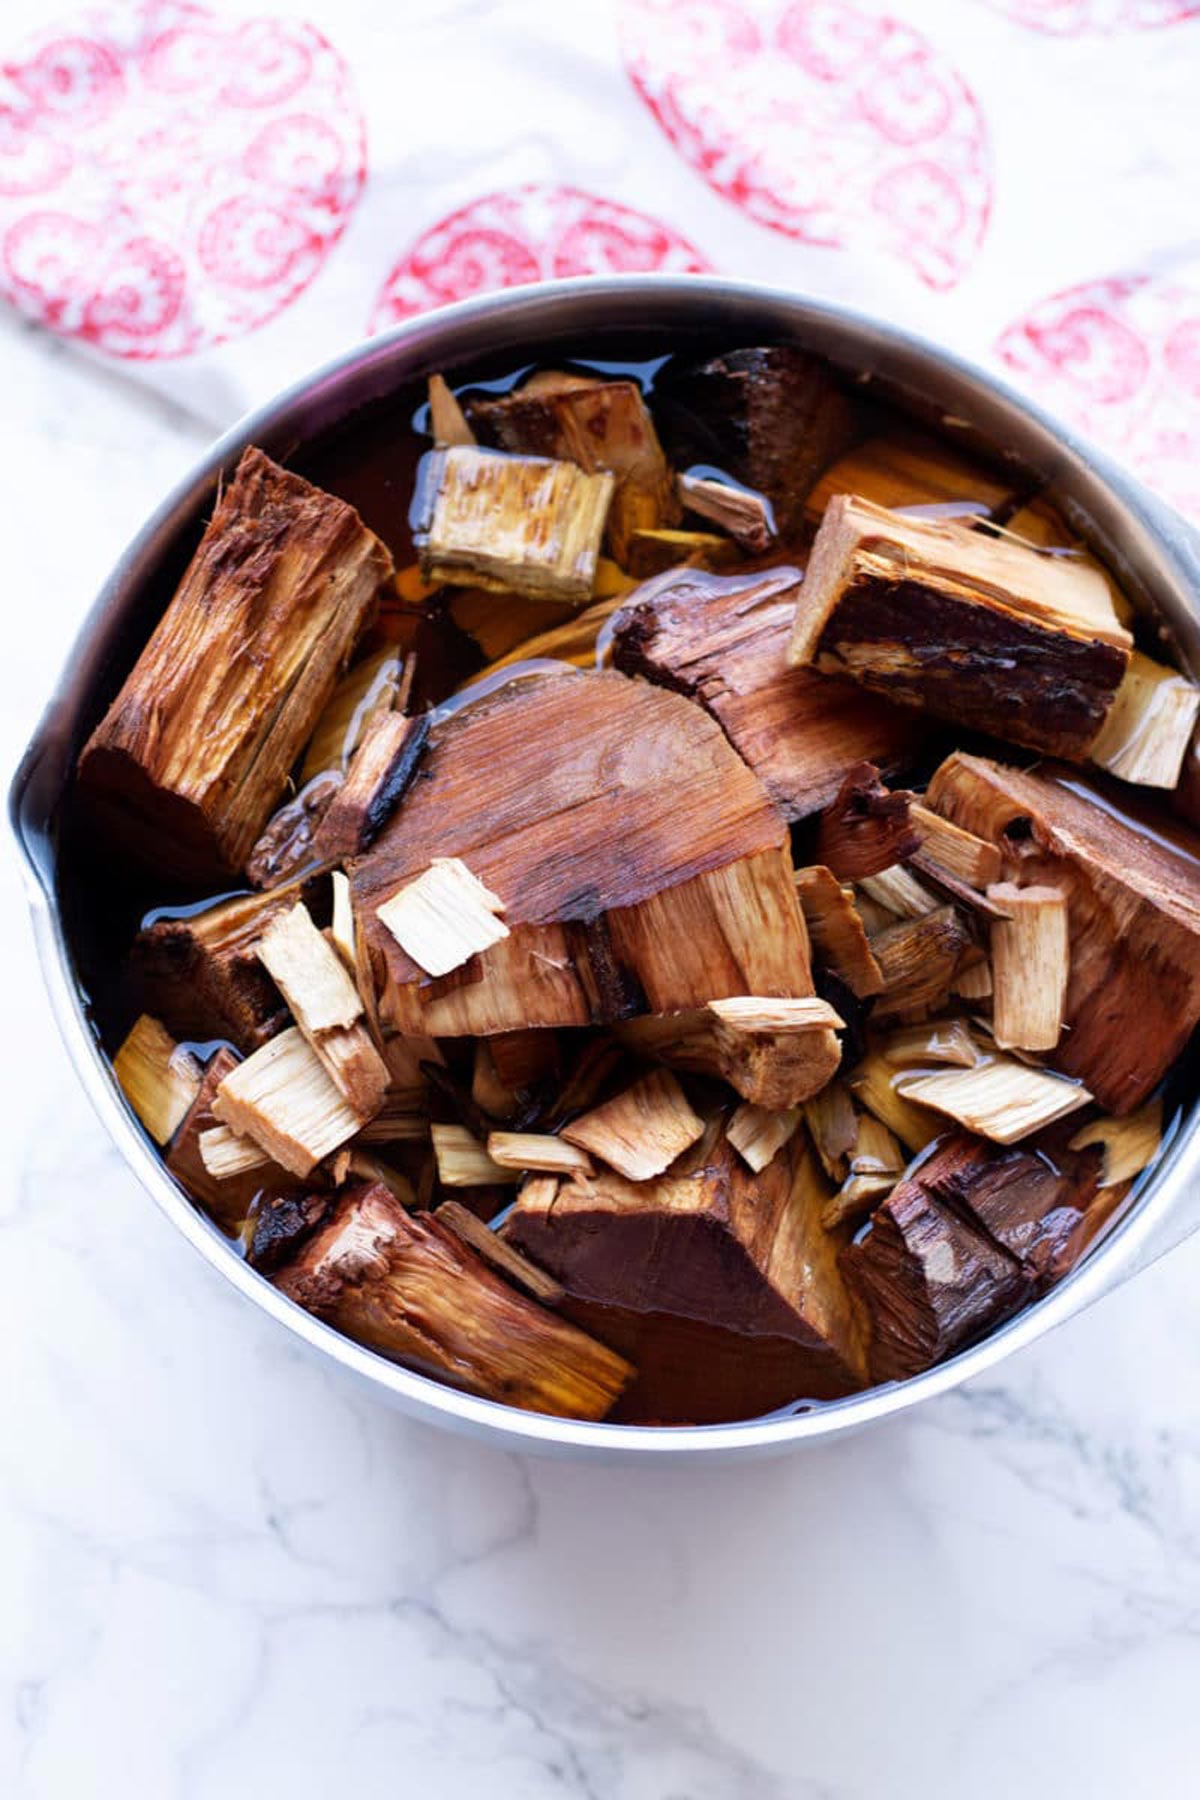 Wood chunks in a silver bowl soaking in water.